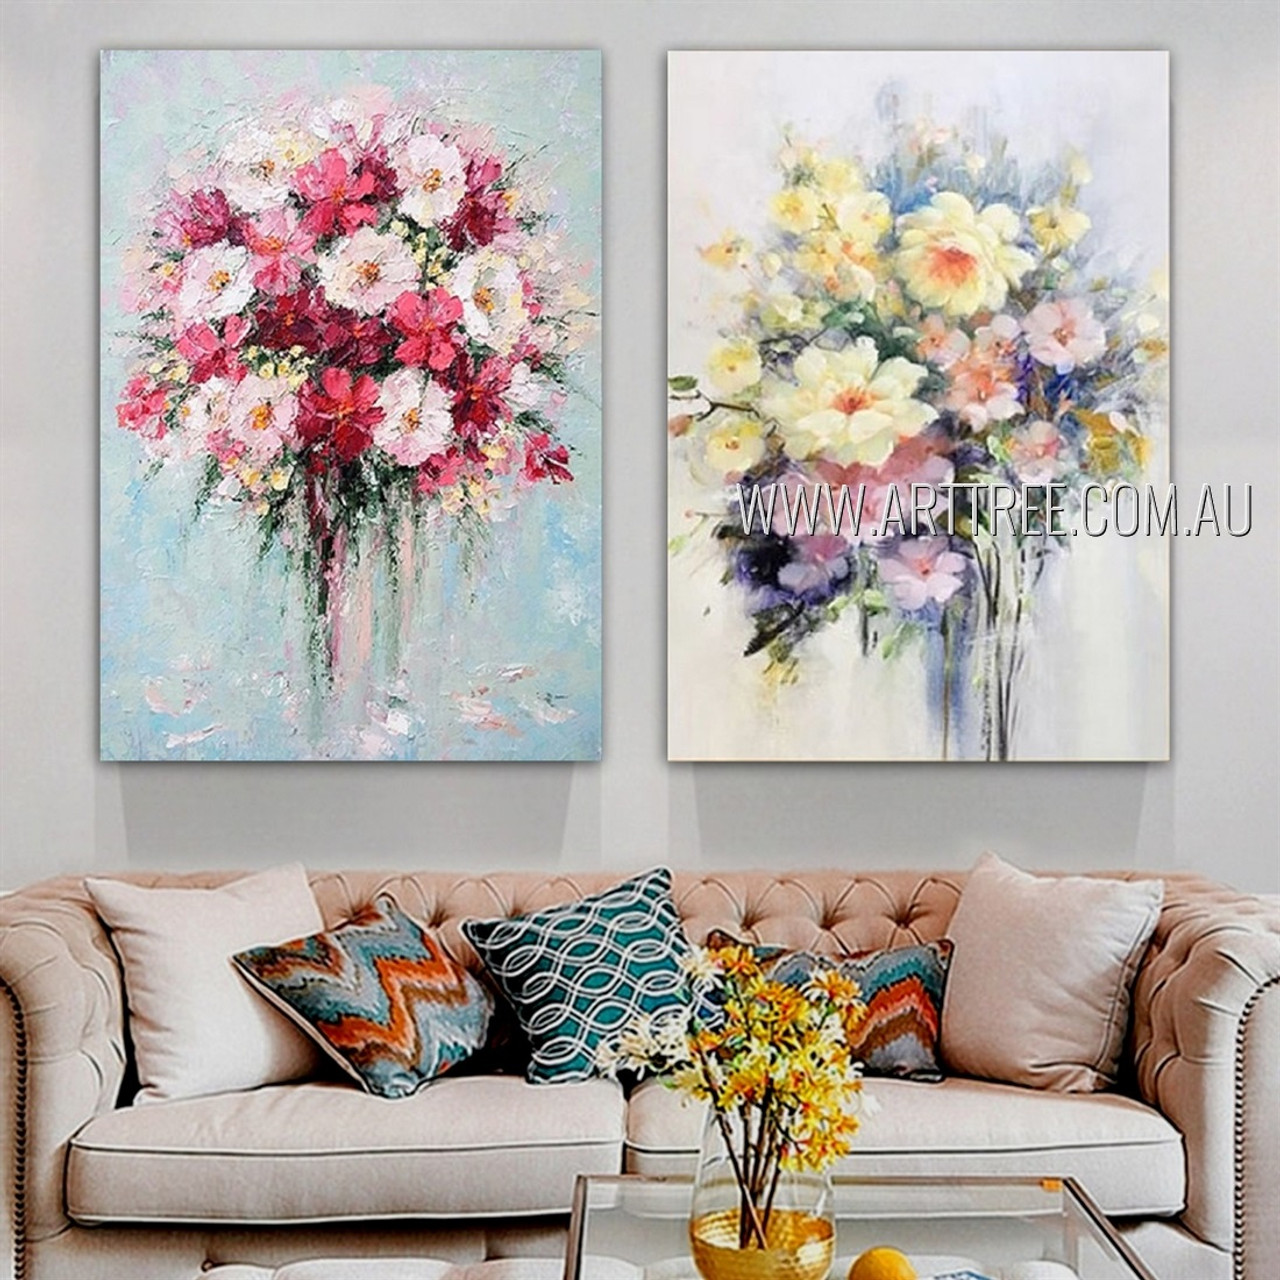 Top 5 Floral Paintings For the Girl’s Room - arttree.com.au